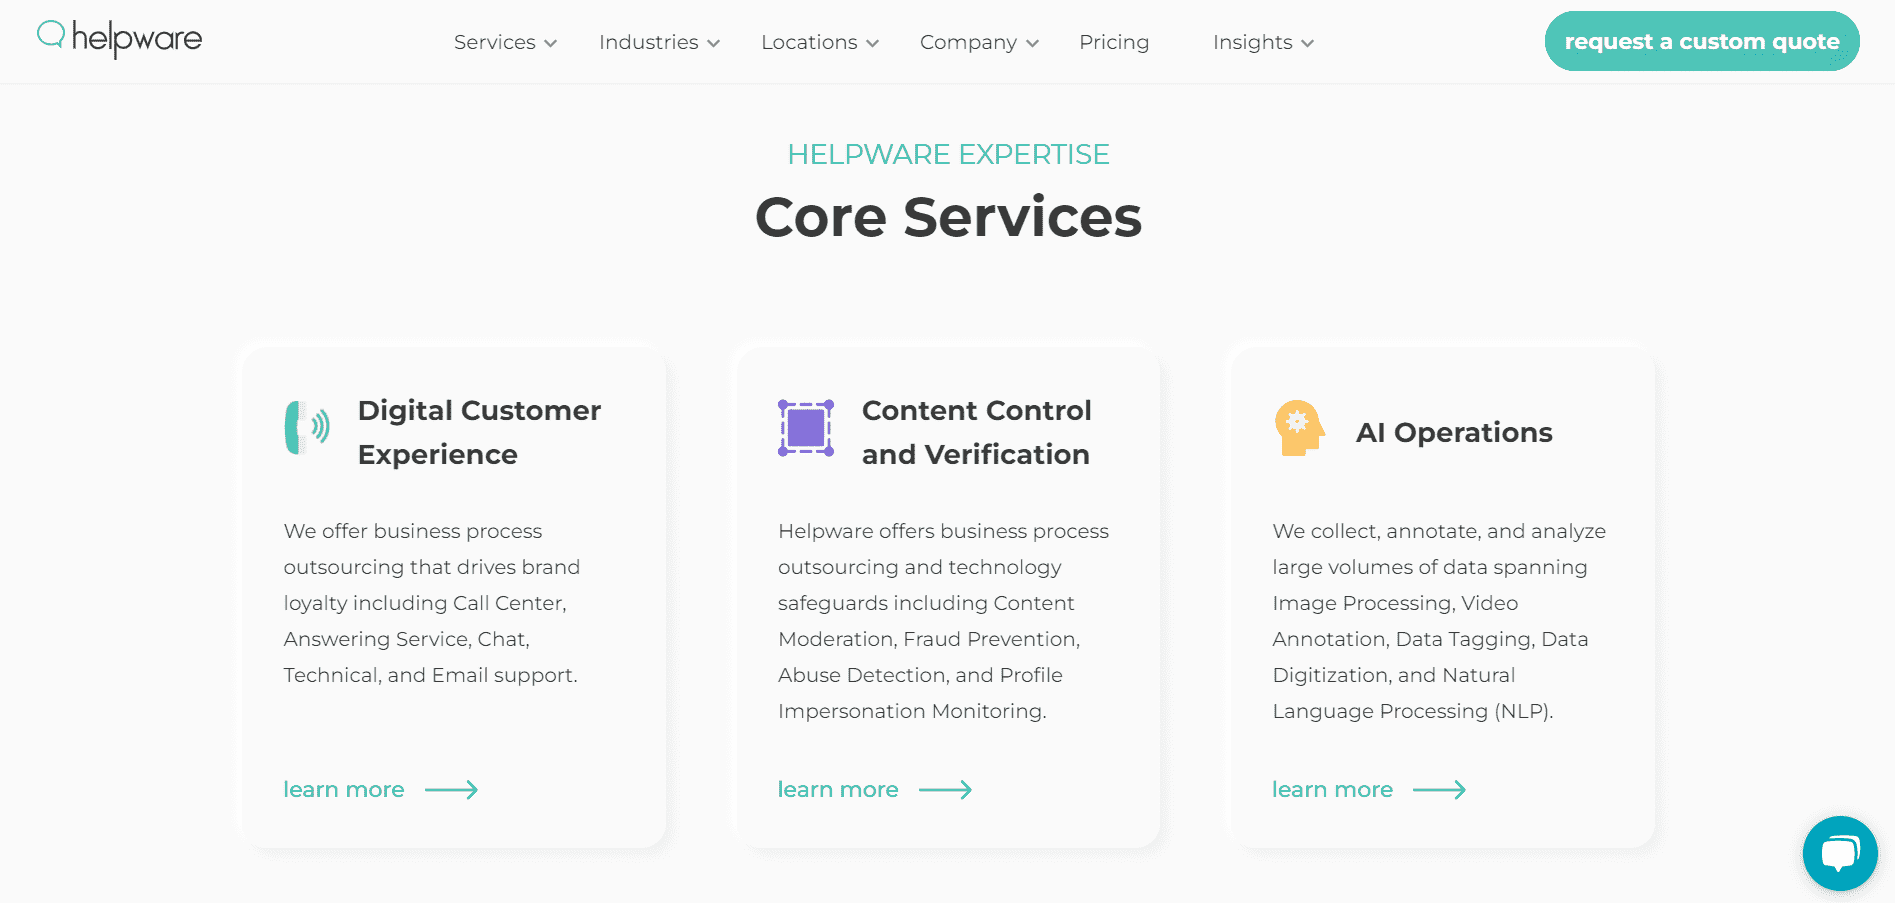 Helpware's website's content, written about their core services.